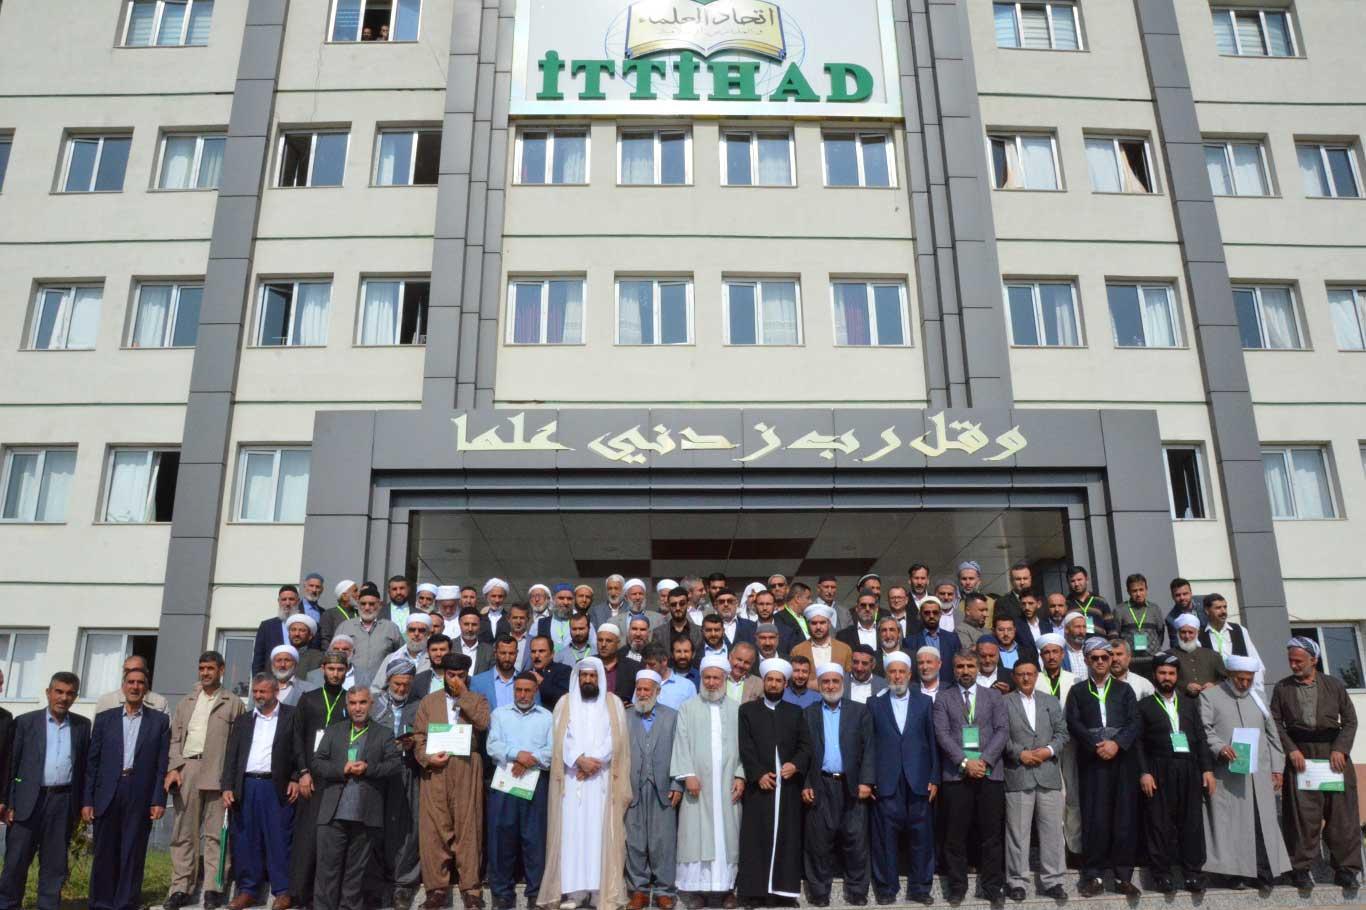 The declaration of conclusion of “4th Traditional Meeting of Scholars” published